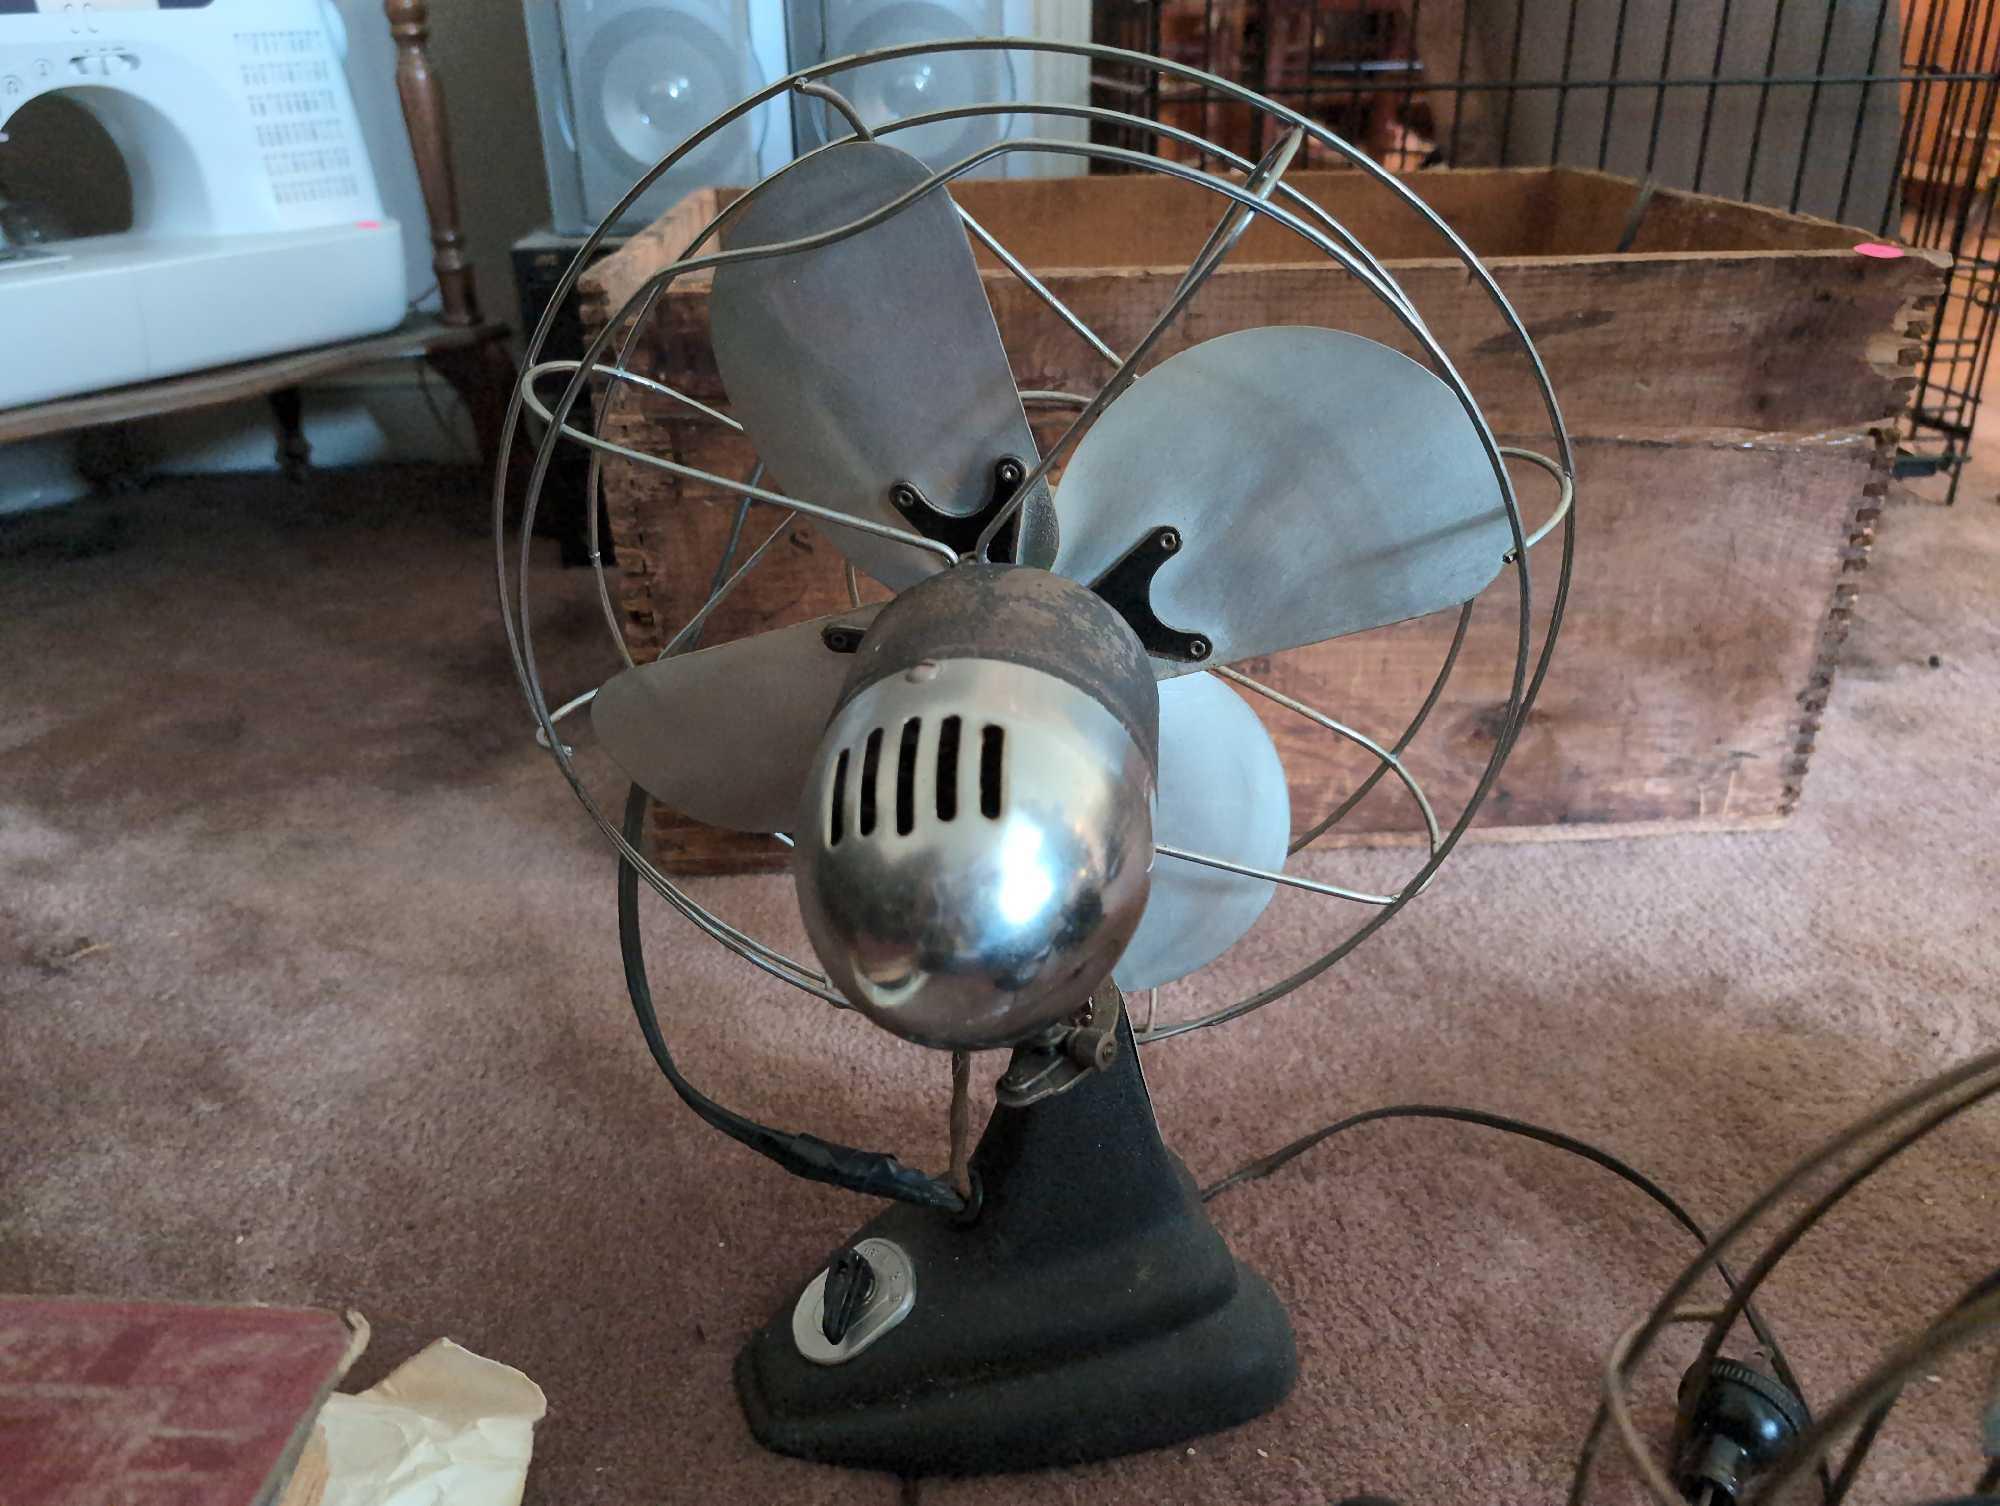 (LR) LOT TO INCLUDE: A VINTAGE ROBBINS & MYERS METAL ELECTRIC FAN, VINTAGE DOMNICK ELECTRIC METAL